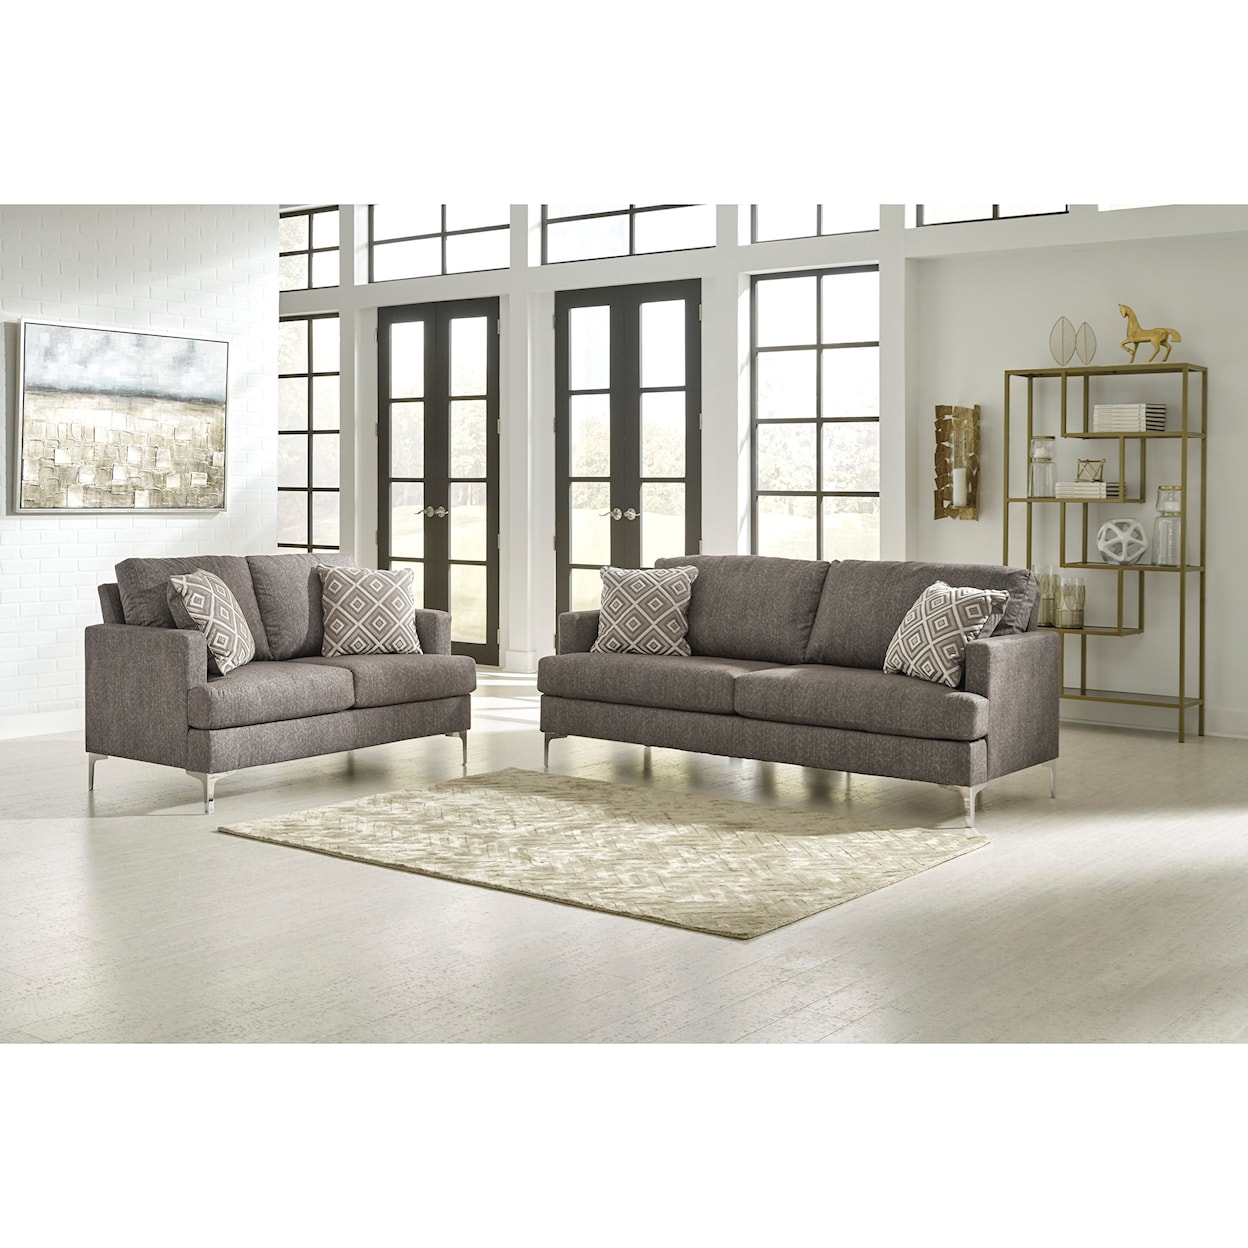 Signature Design by Ashley Furniture Arcola Stationary Living Room Group